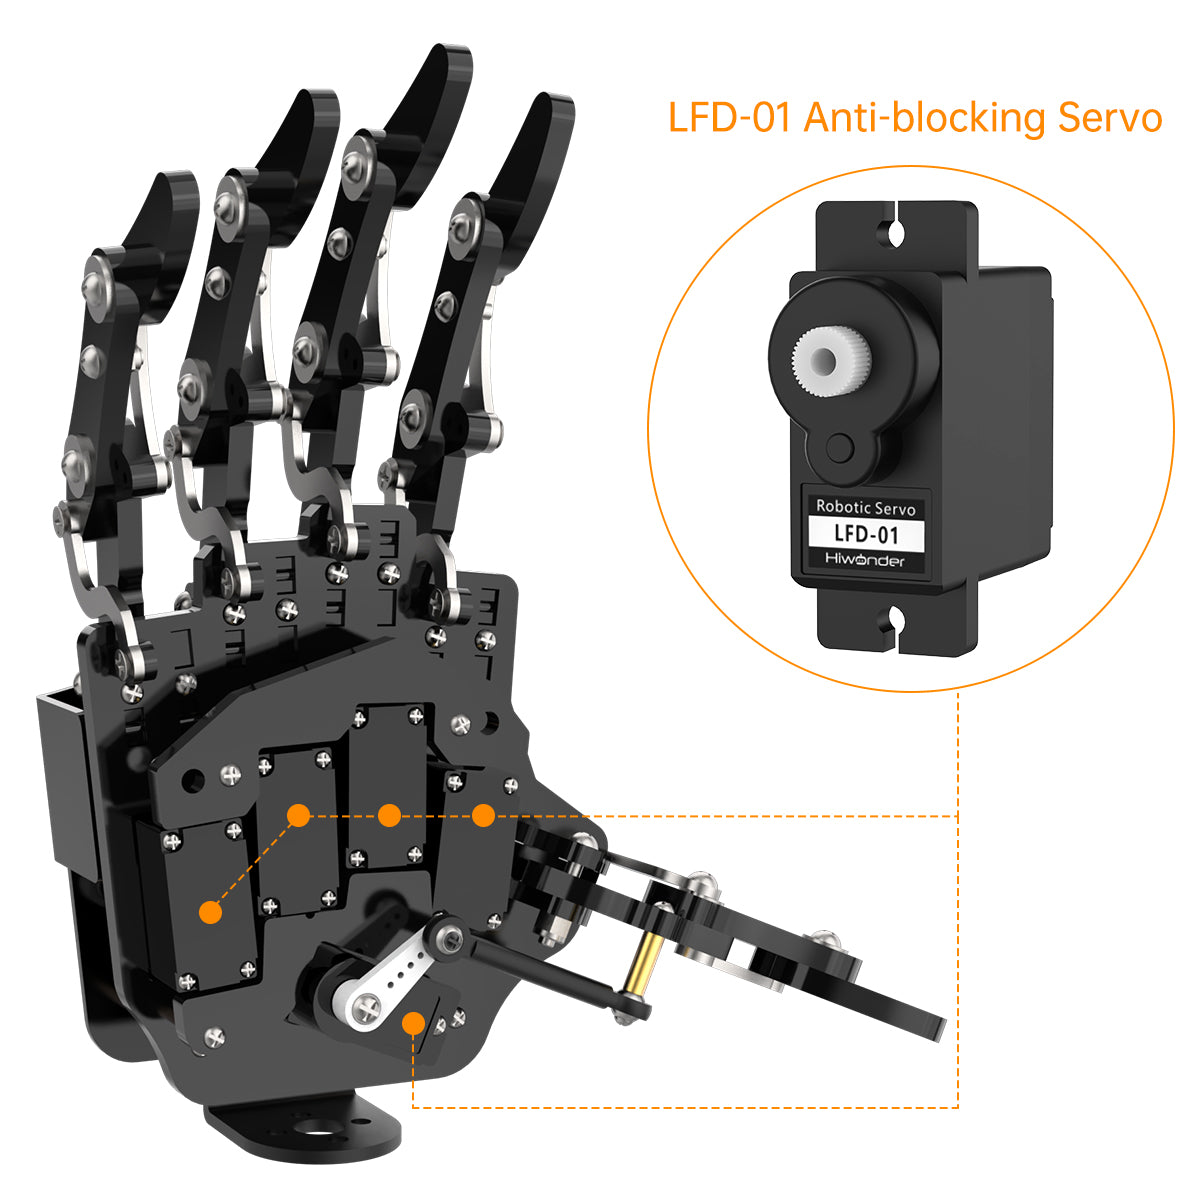 uHand: Hiwonder Robotic Hand Fingers Move Individually for Robot DIY